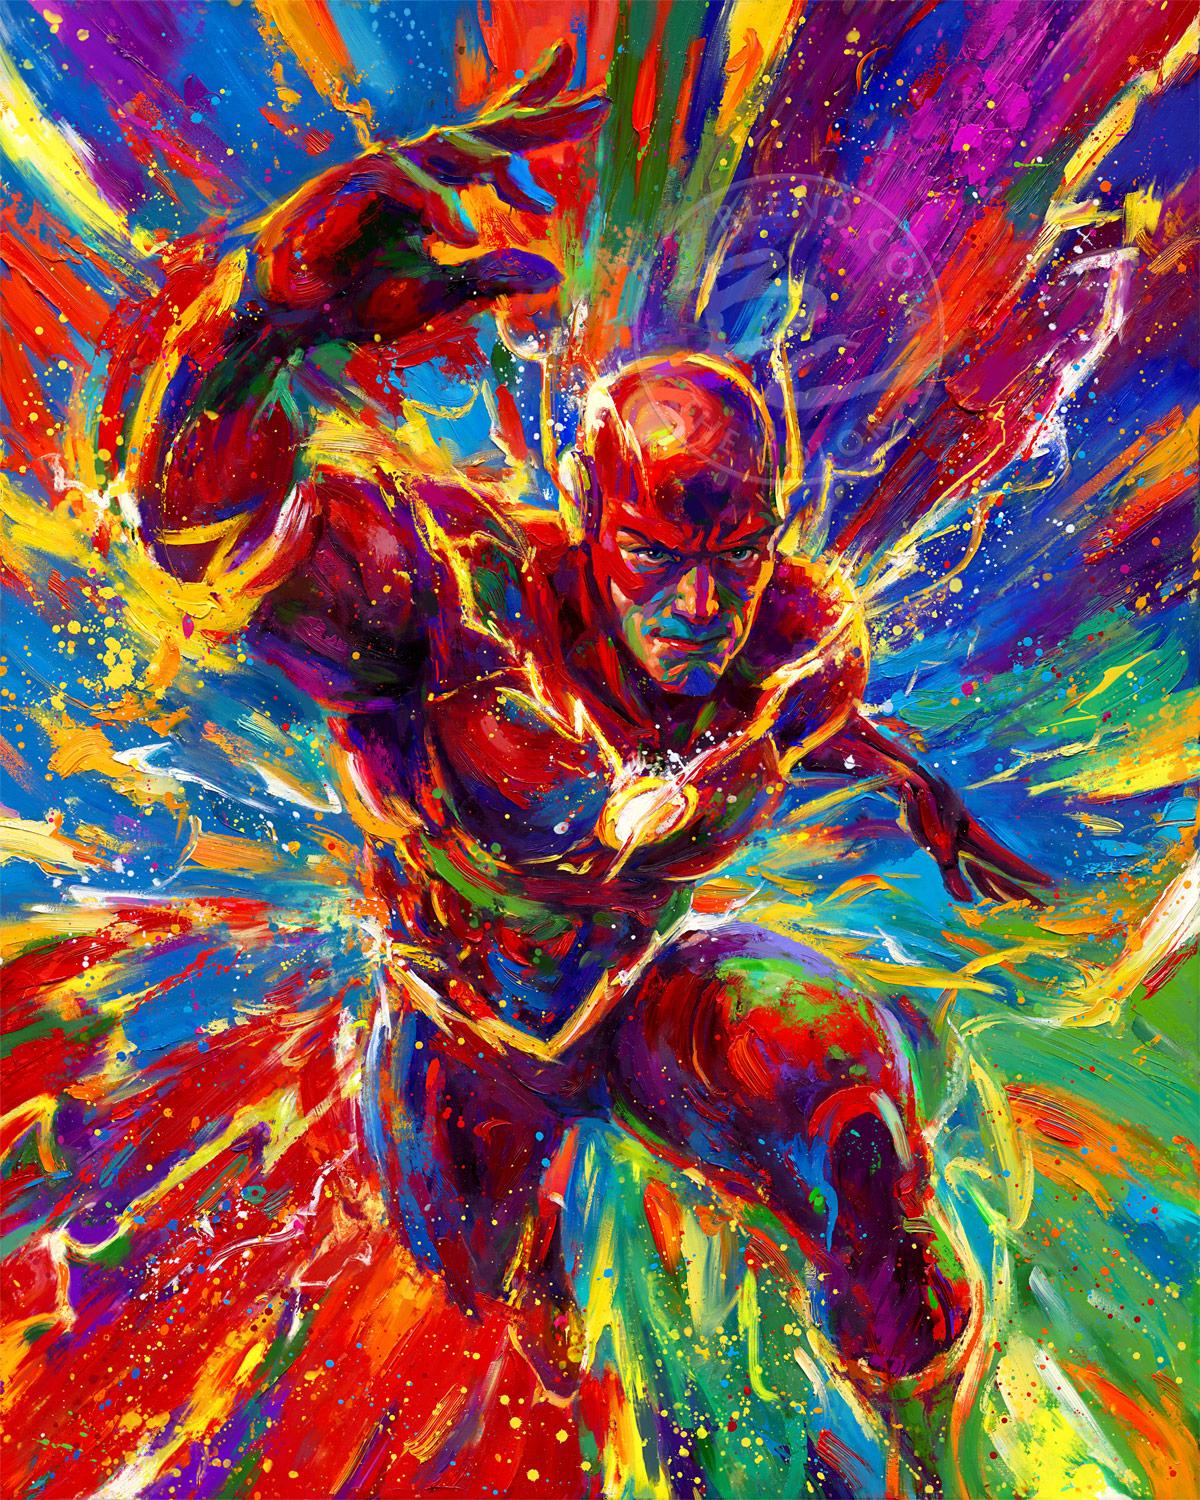 During my travels across North America to various comic cons, I heard a common question from fans, “When are you going to paint The Flash?” It never failed; at every con, more and more fans asked me to paint the Scarlet Speedster. So, I re-read